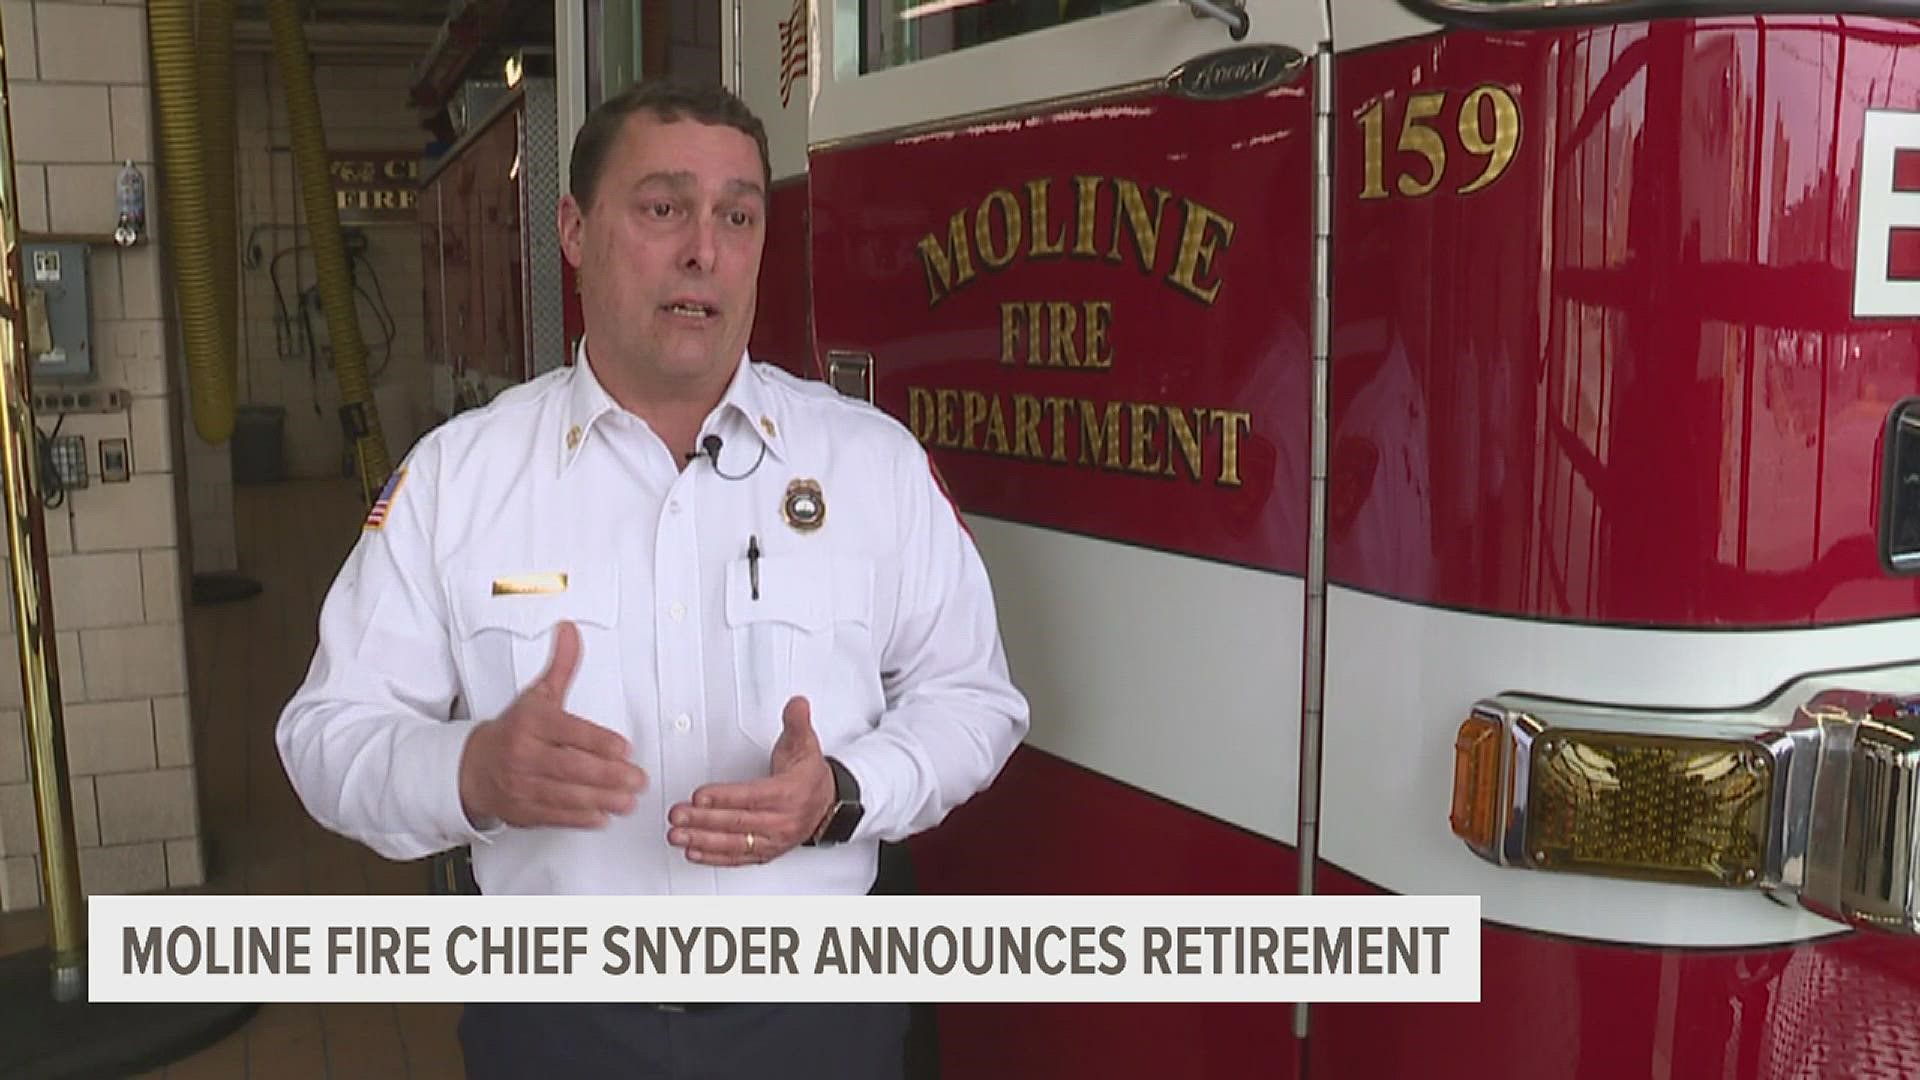 The head of the Moline Fire Department will be retiring at the end of August, to be replaced by his Deputy Chief.